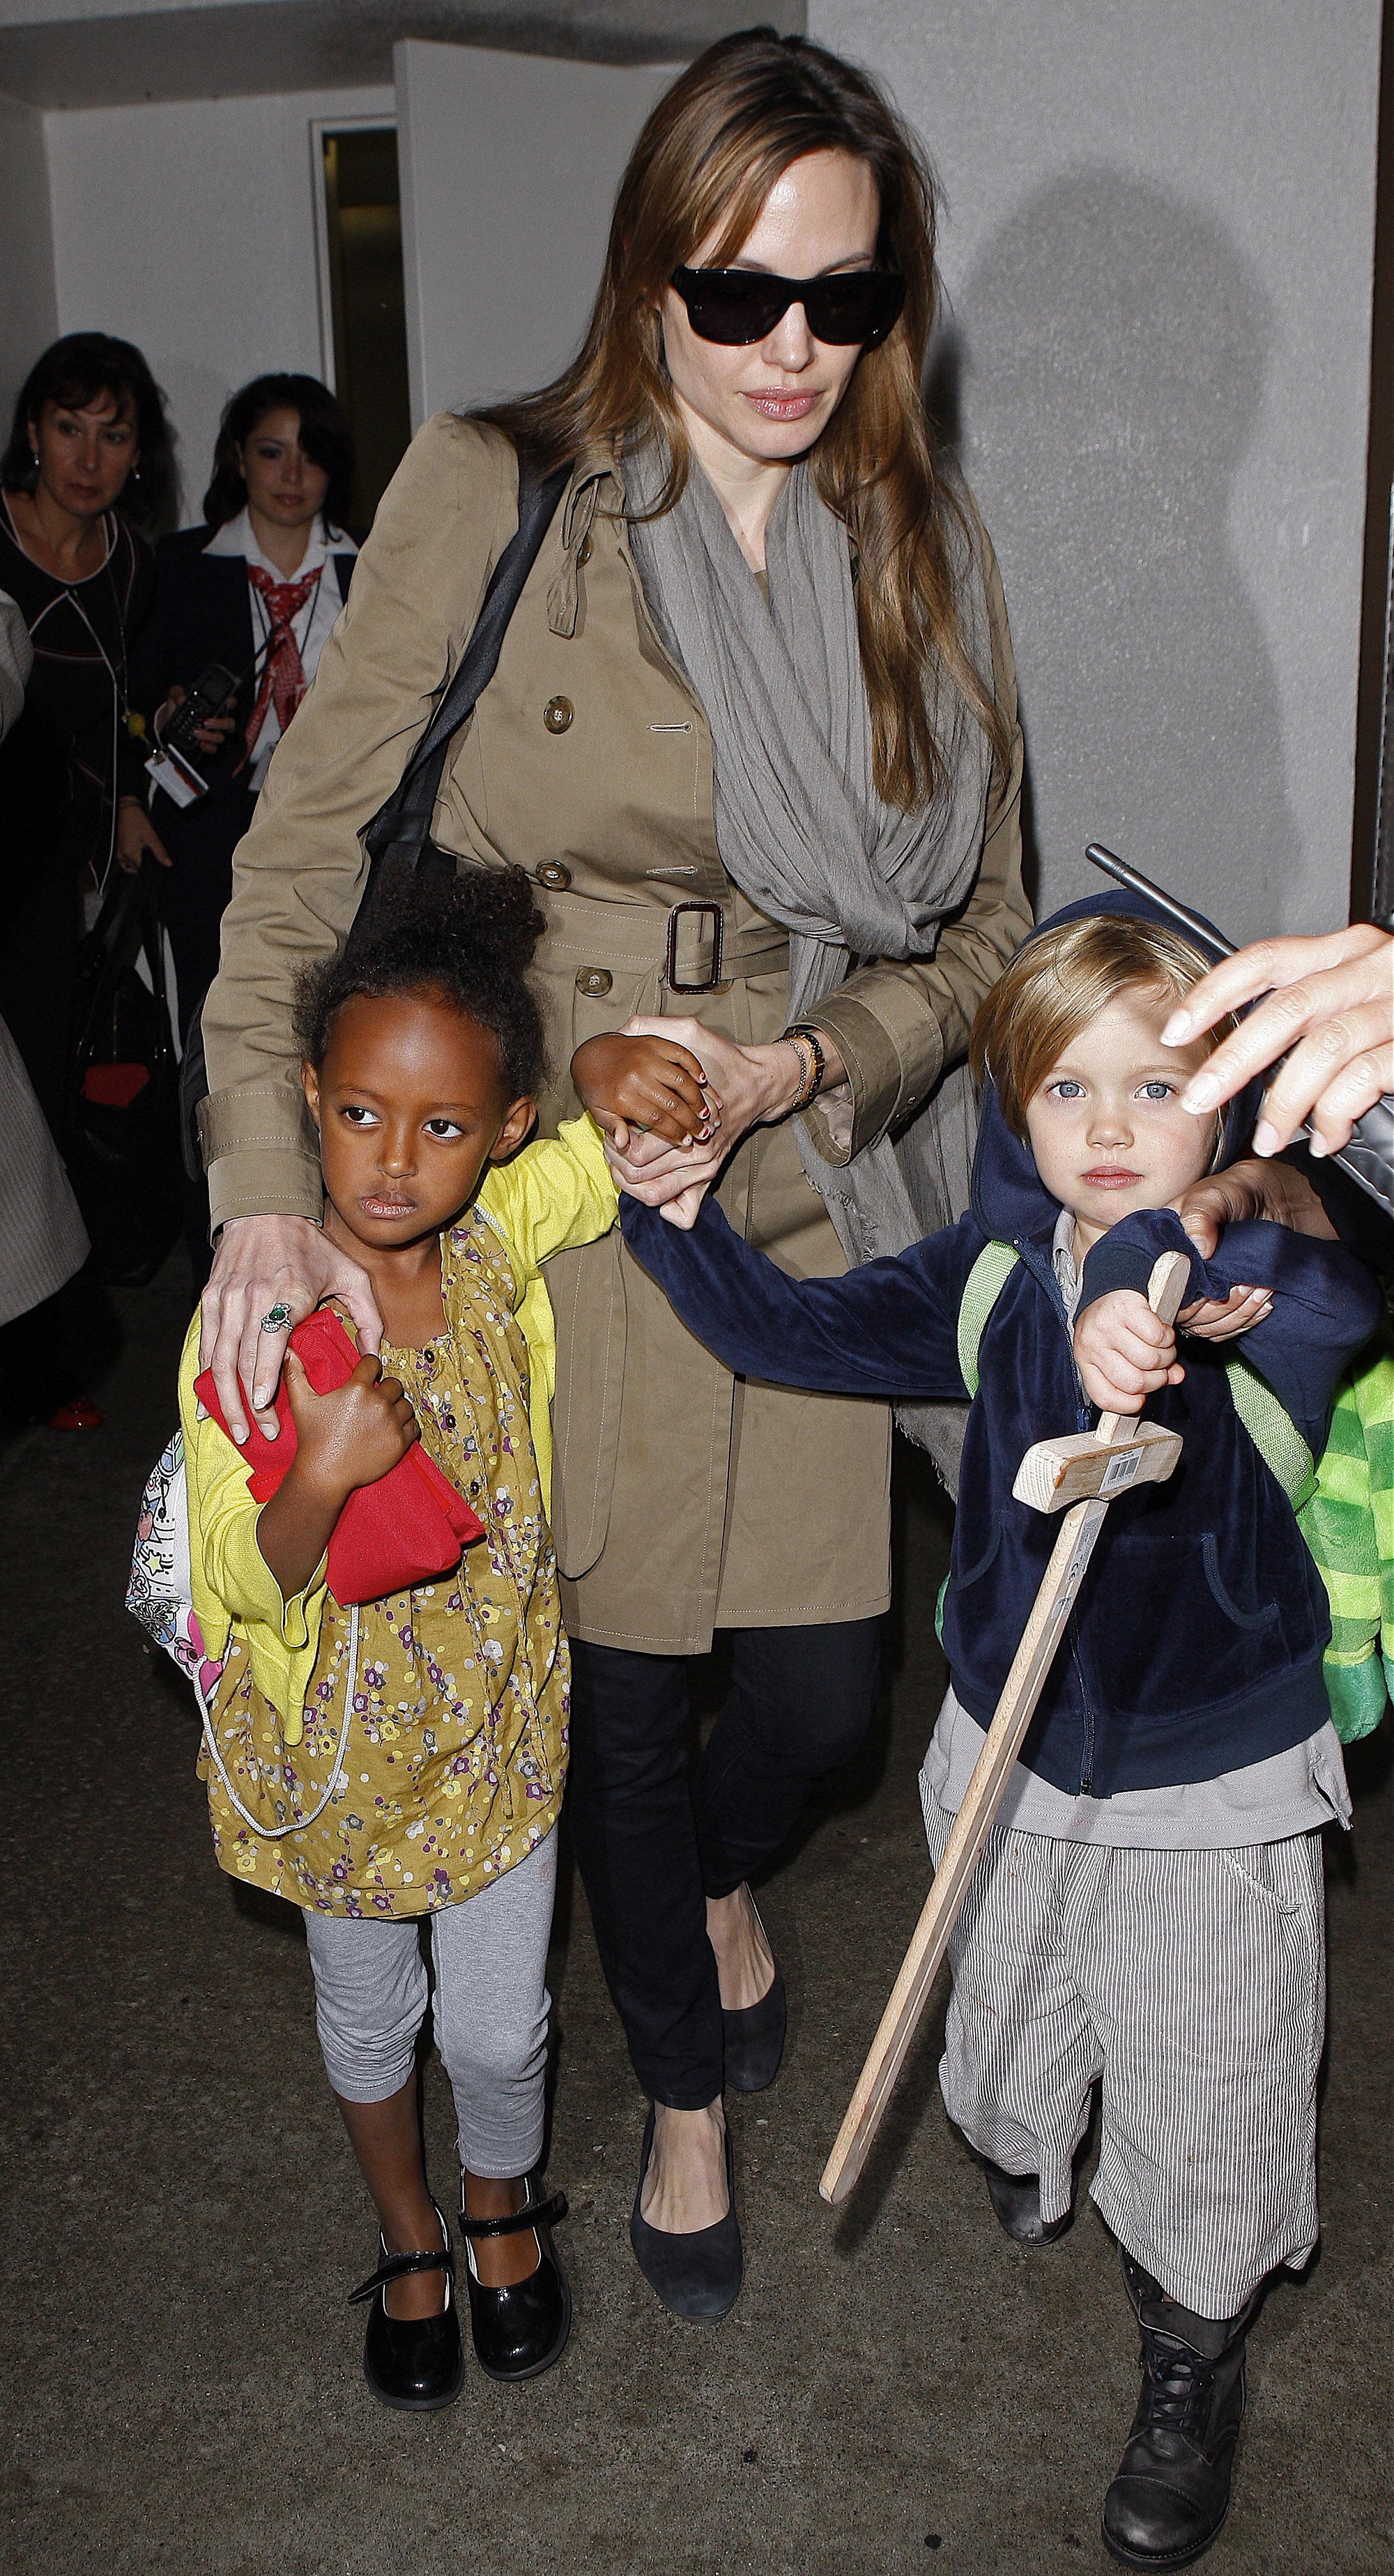 Angelina Jolie and daughters Zahara and Shiloh at LAX Airport in Los Angeles, California on September 18, 2010 | Source: Getty Images